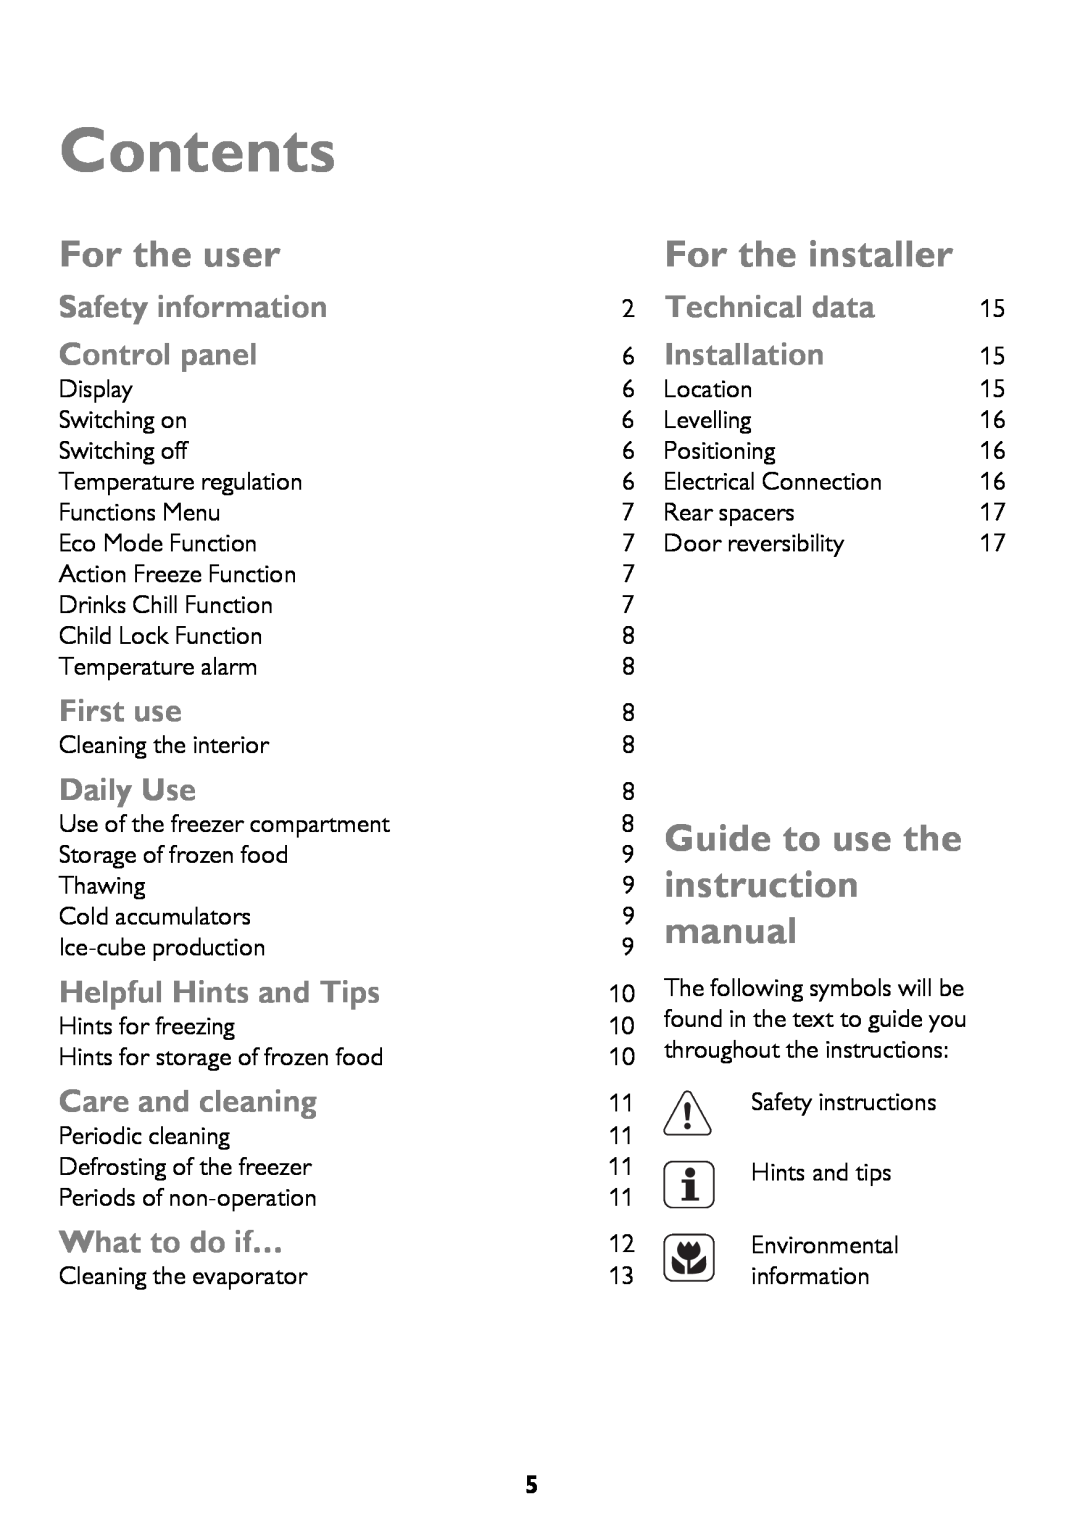 John Lewis JLFZW1601 Contents, For the user, For the installer, Guide to use the 9 instruction 99 manual, Technical data 